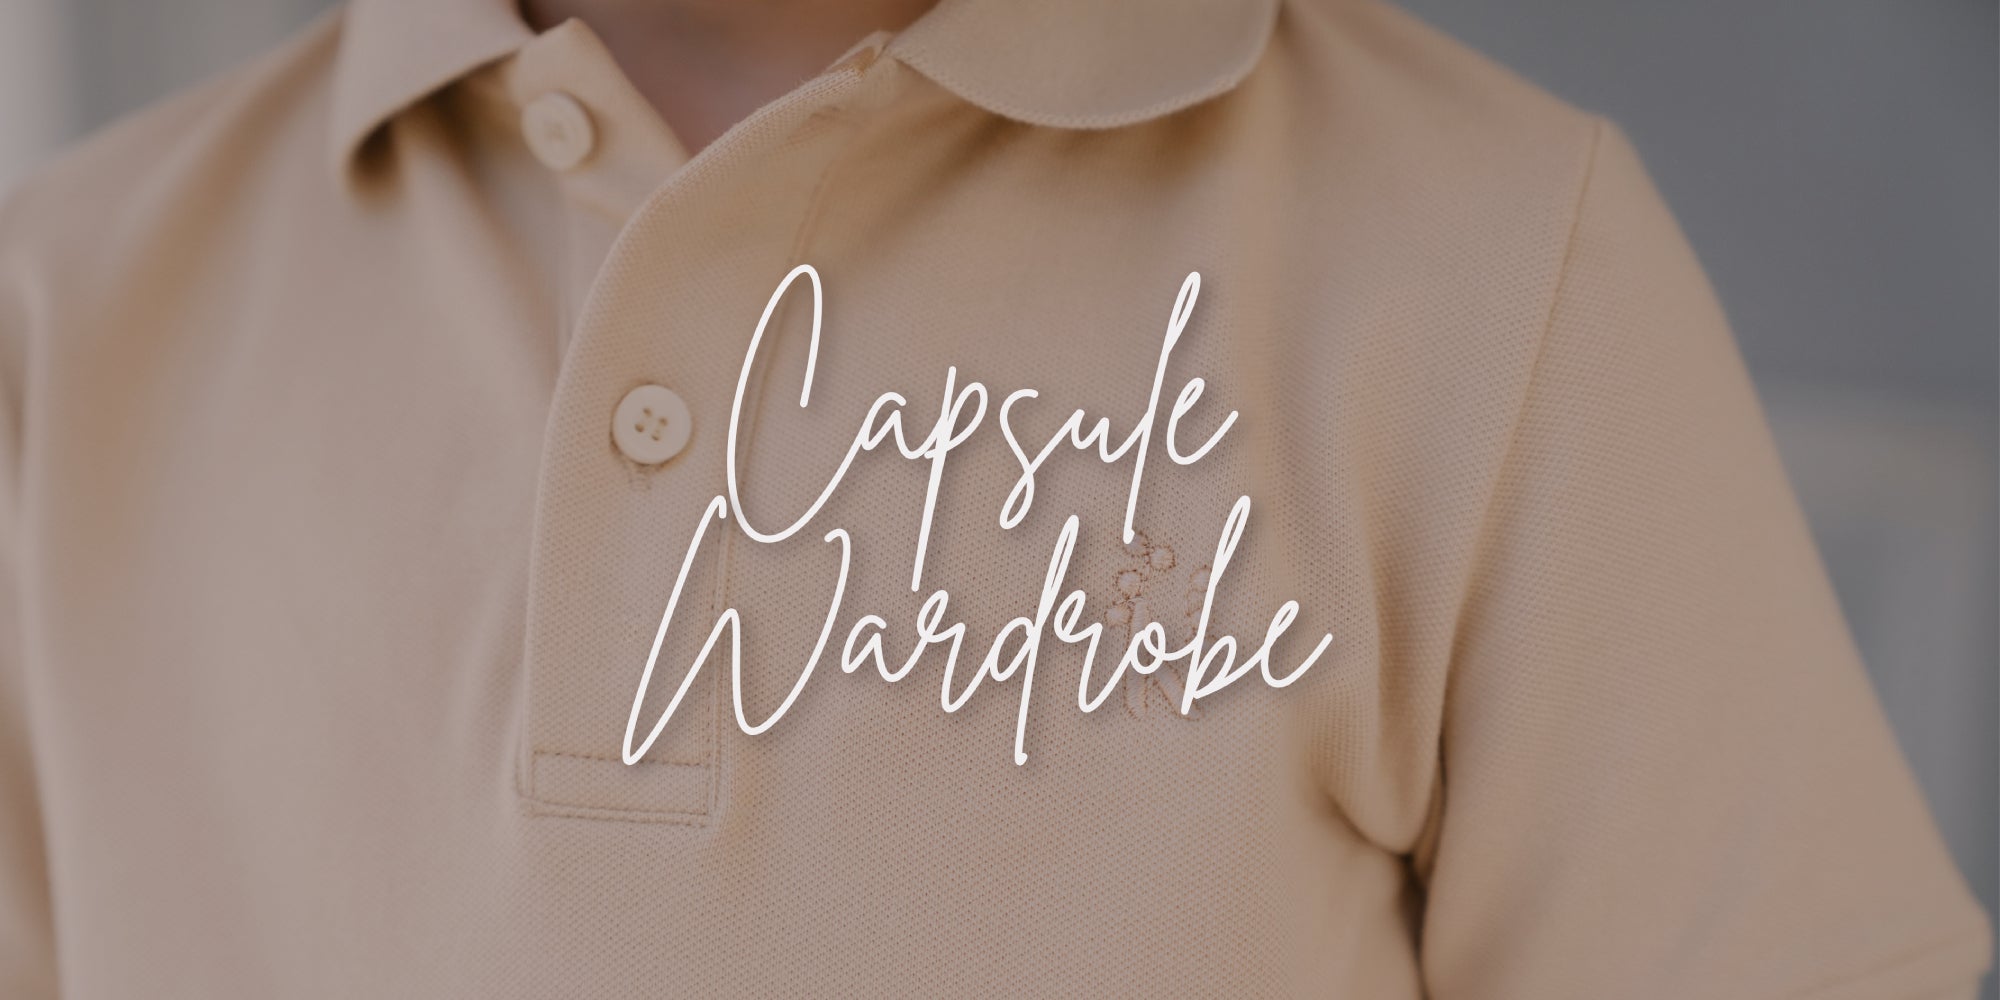 Mix and match pieces in a Capsule wardrobe